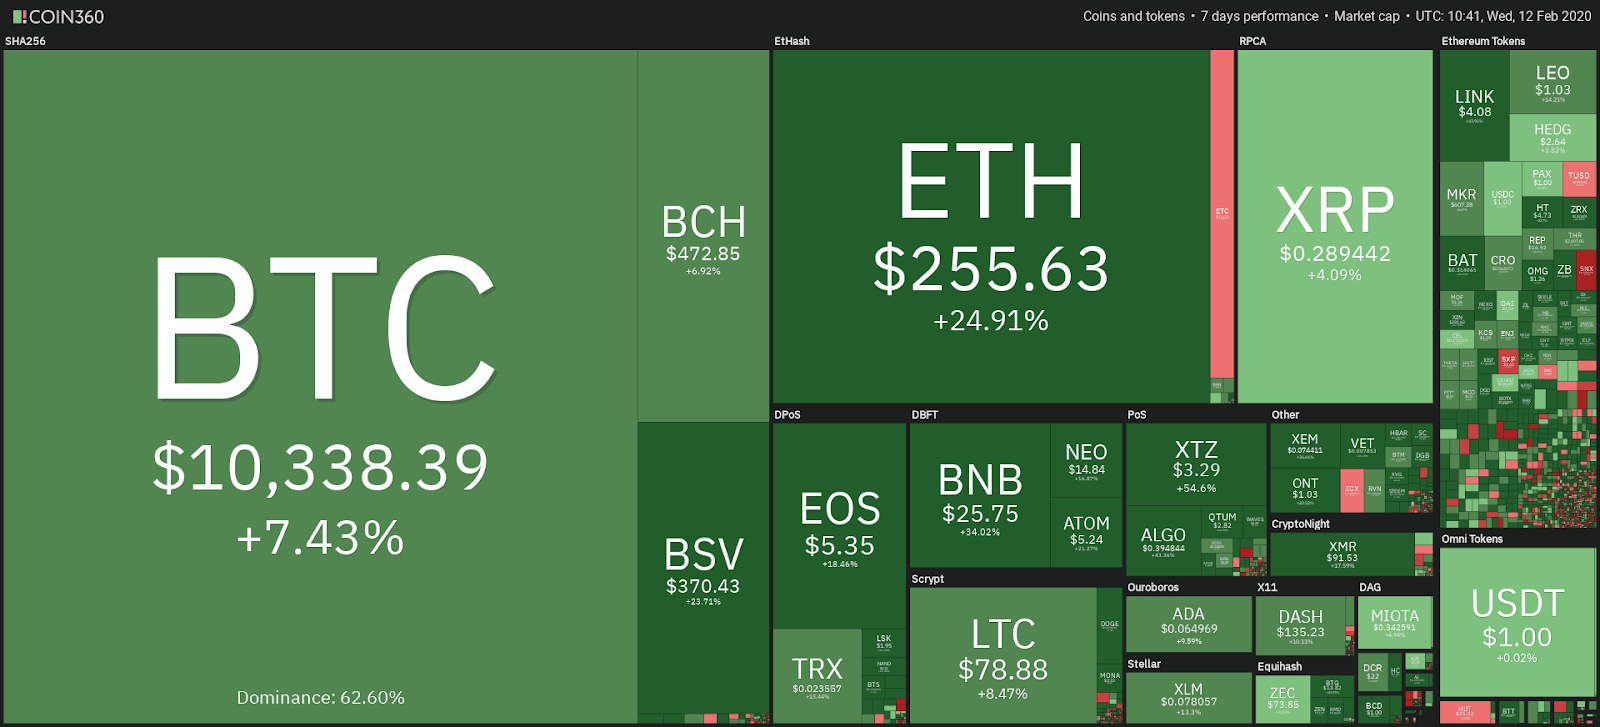 Cryptocurrency market performance, past 7 days